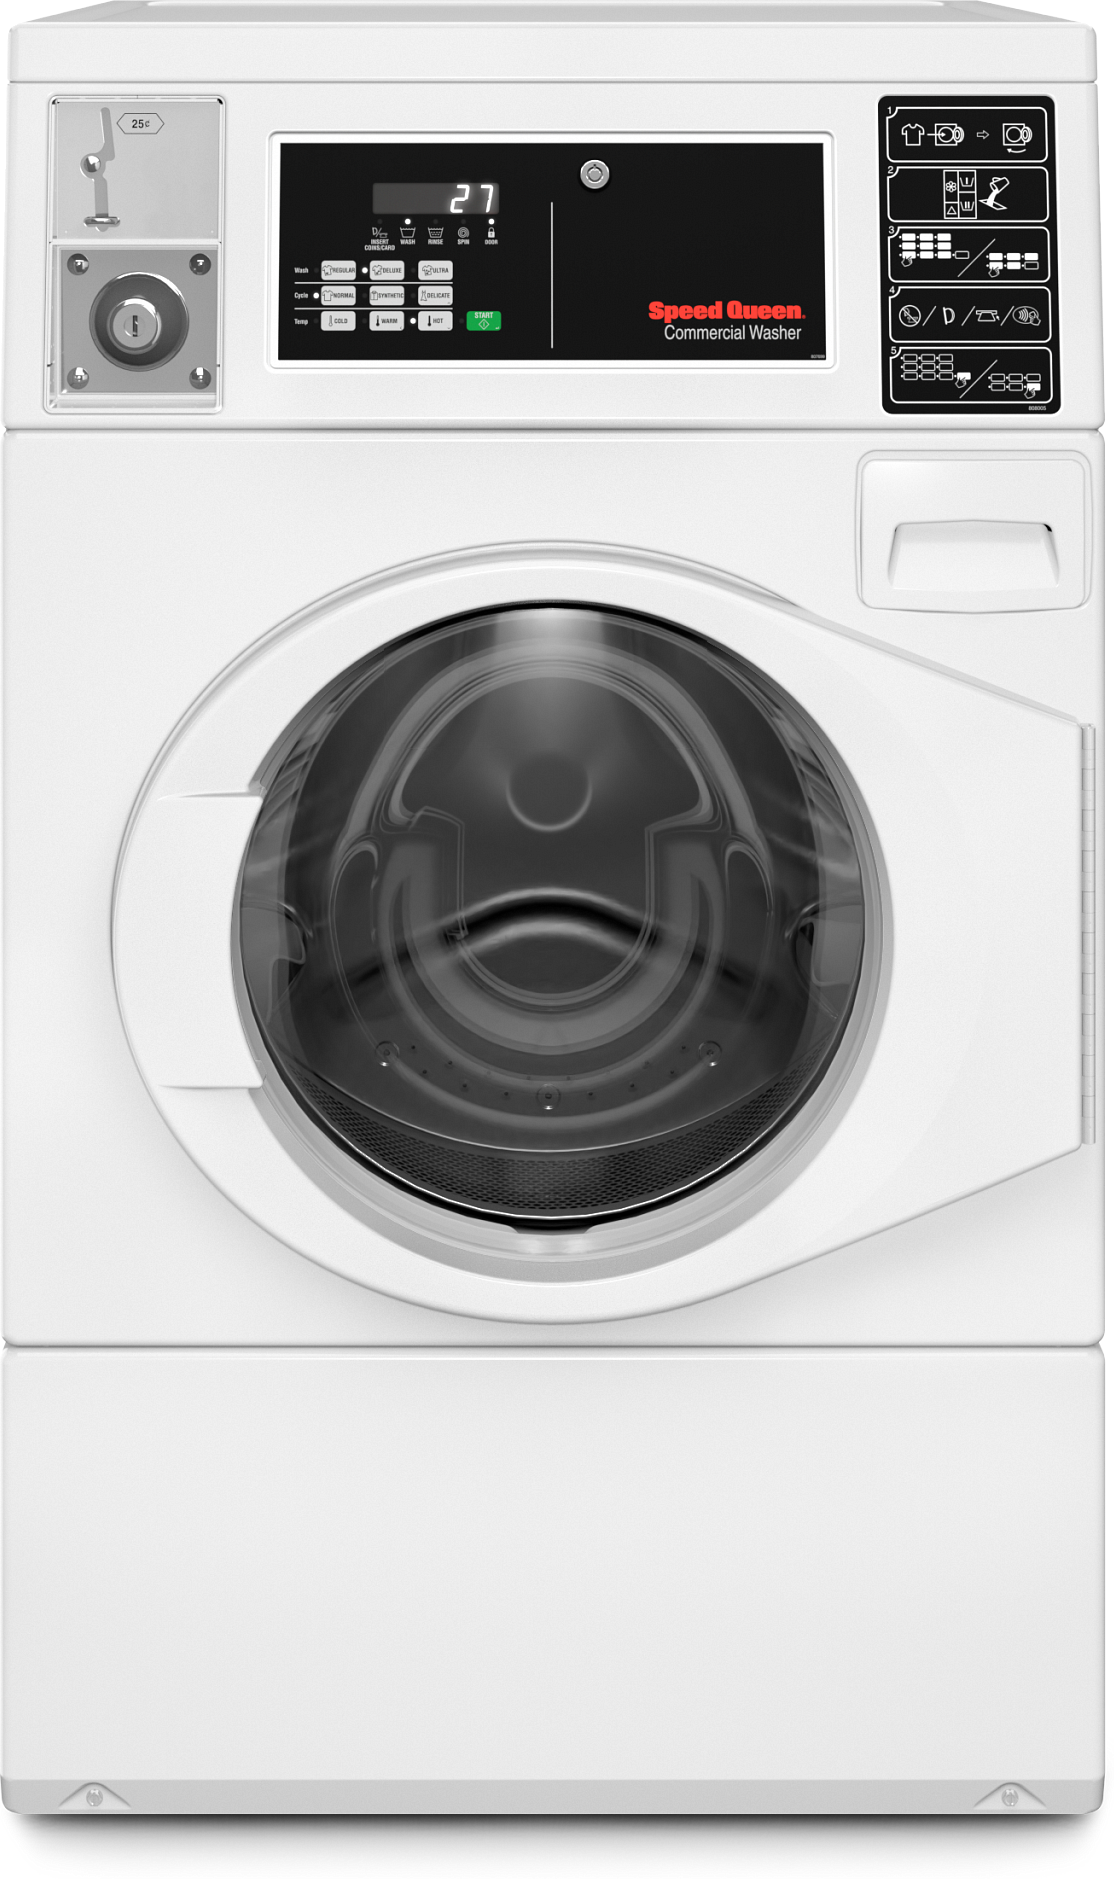 Speed Queen 3.42 Cu. Ft. Front Load Washer FV6010WN